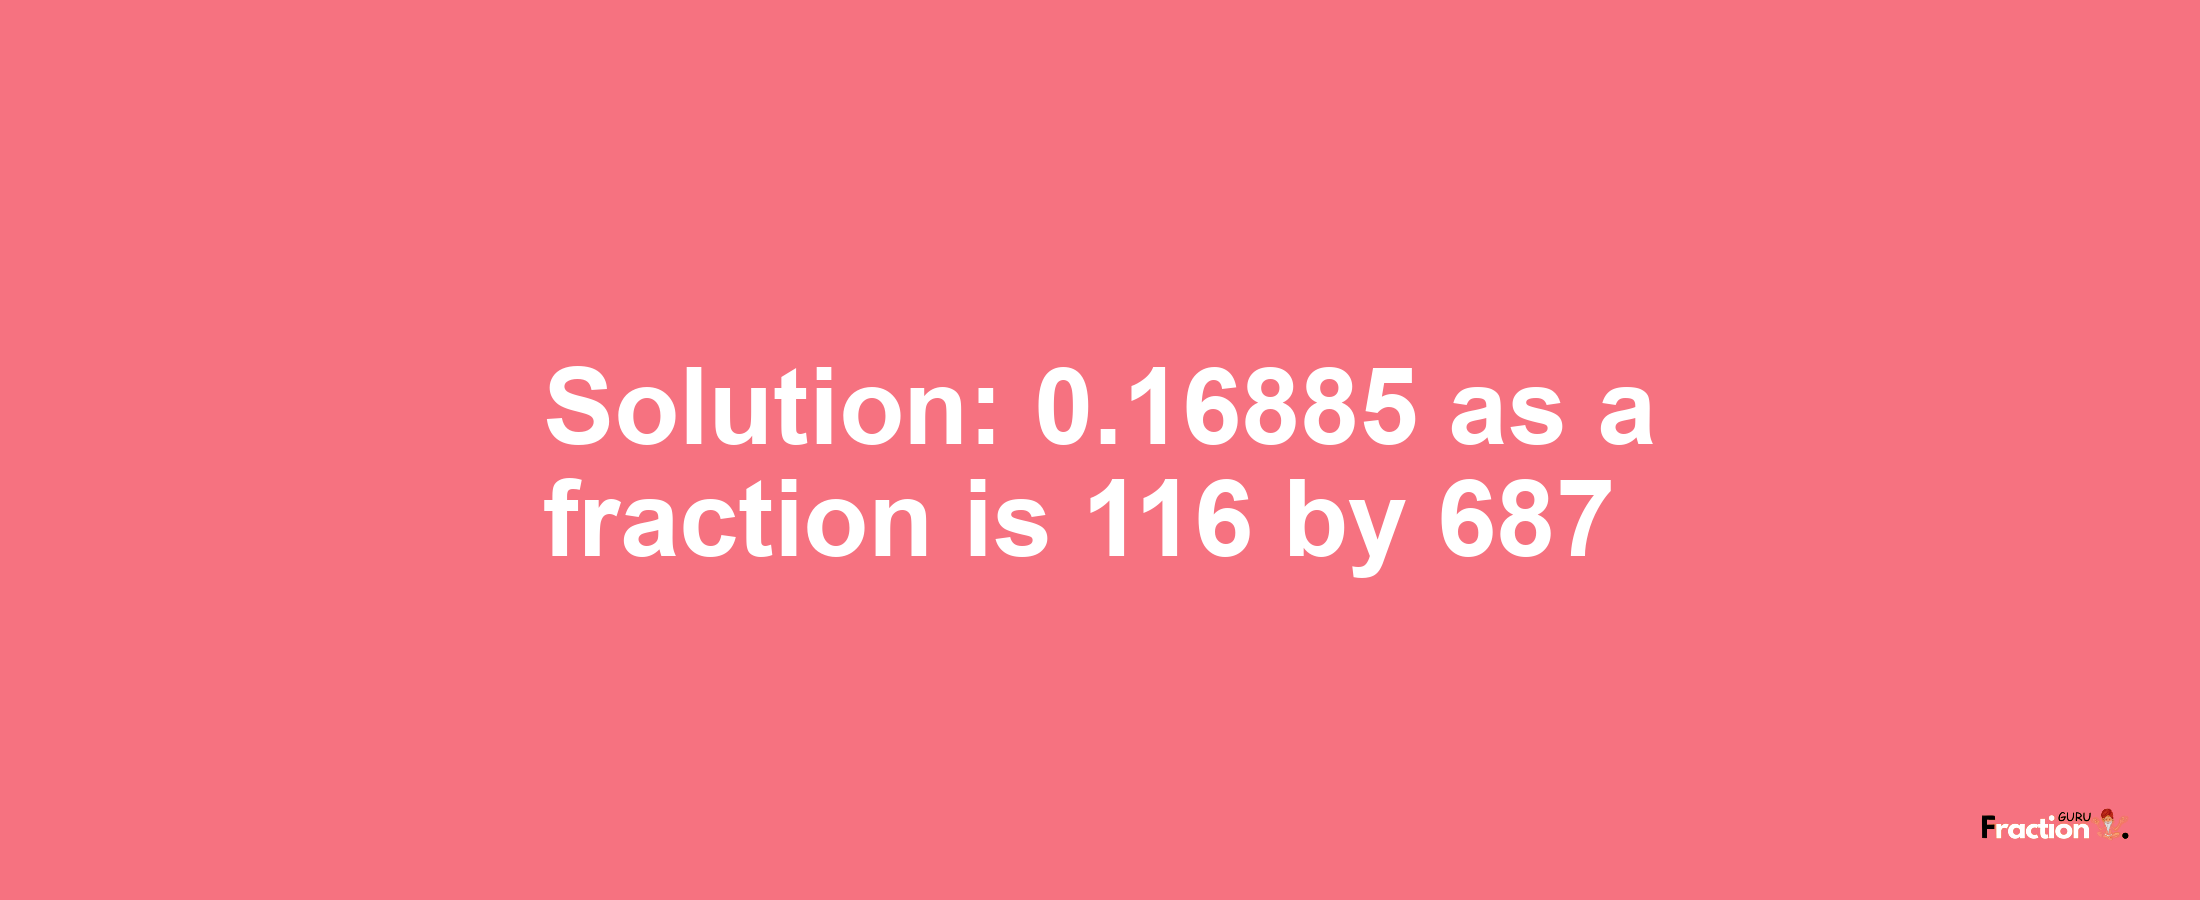 Solution:0.16885 as a fraction is 116/687